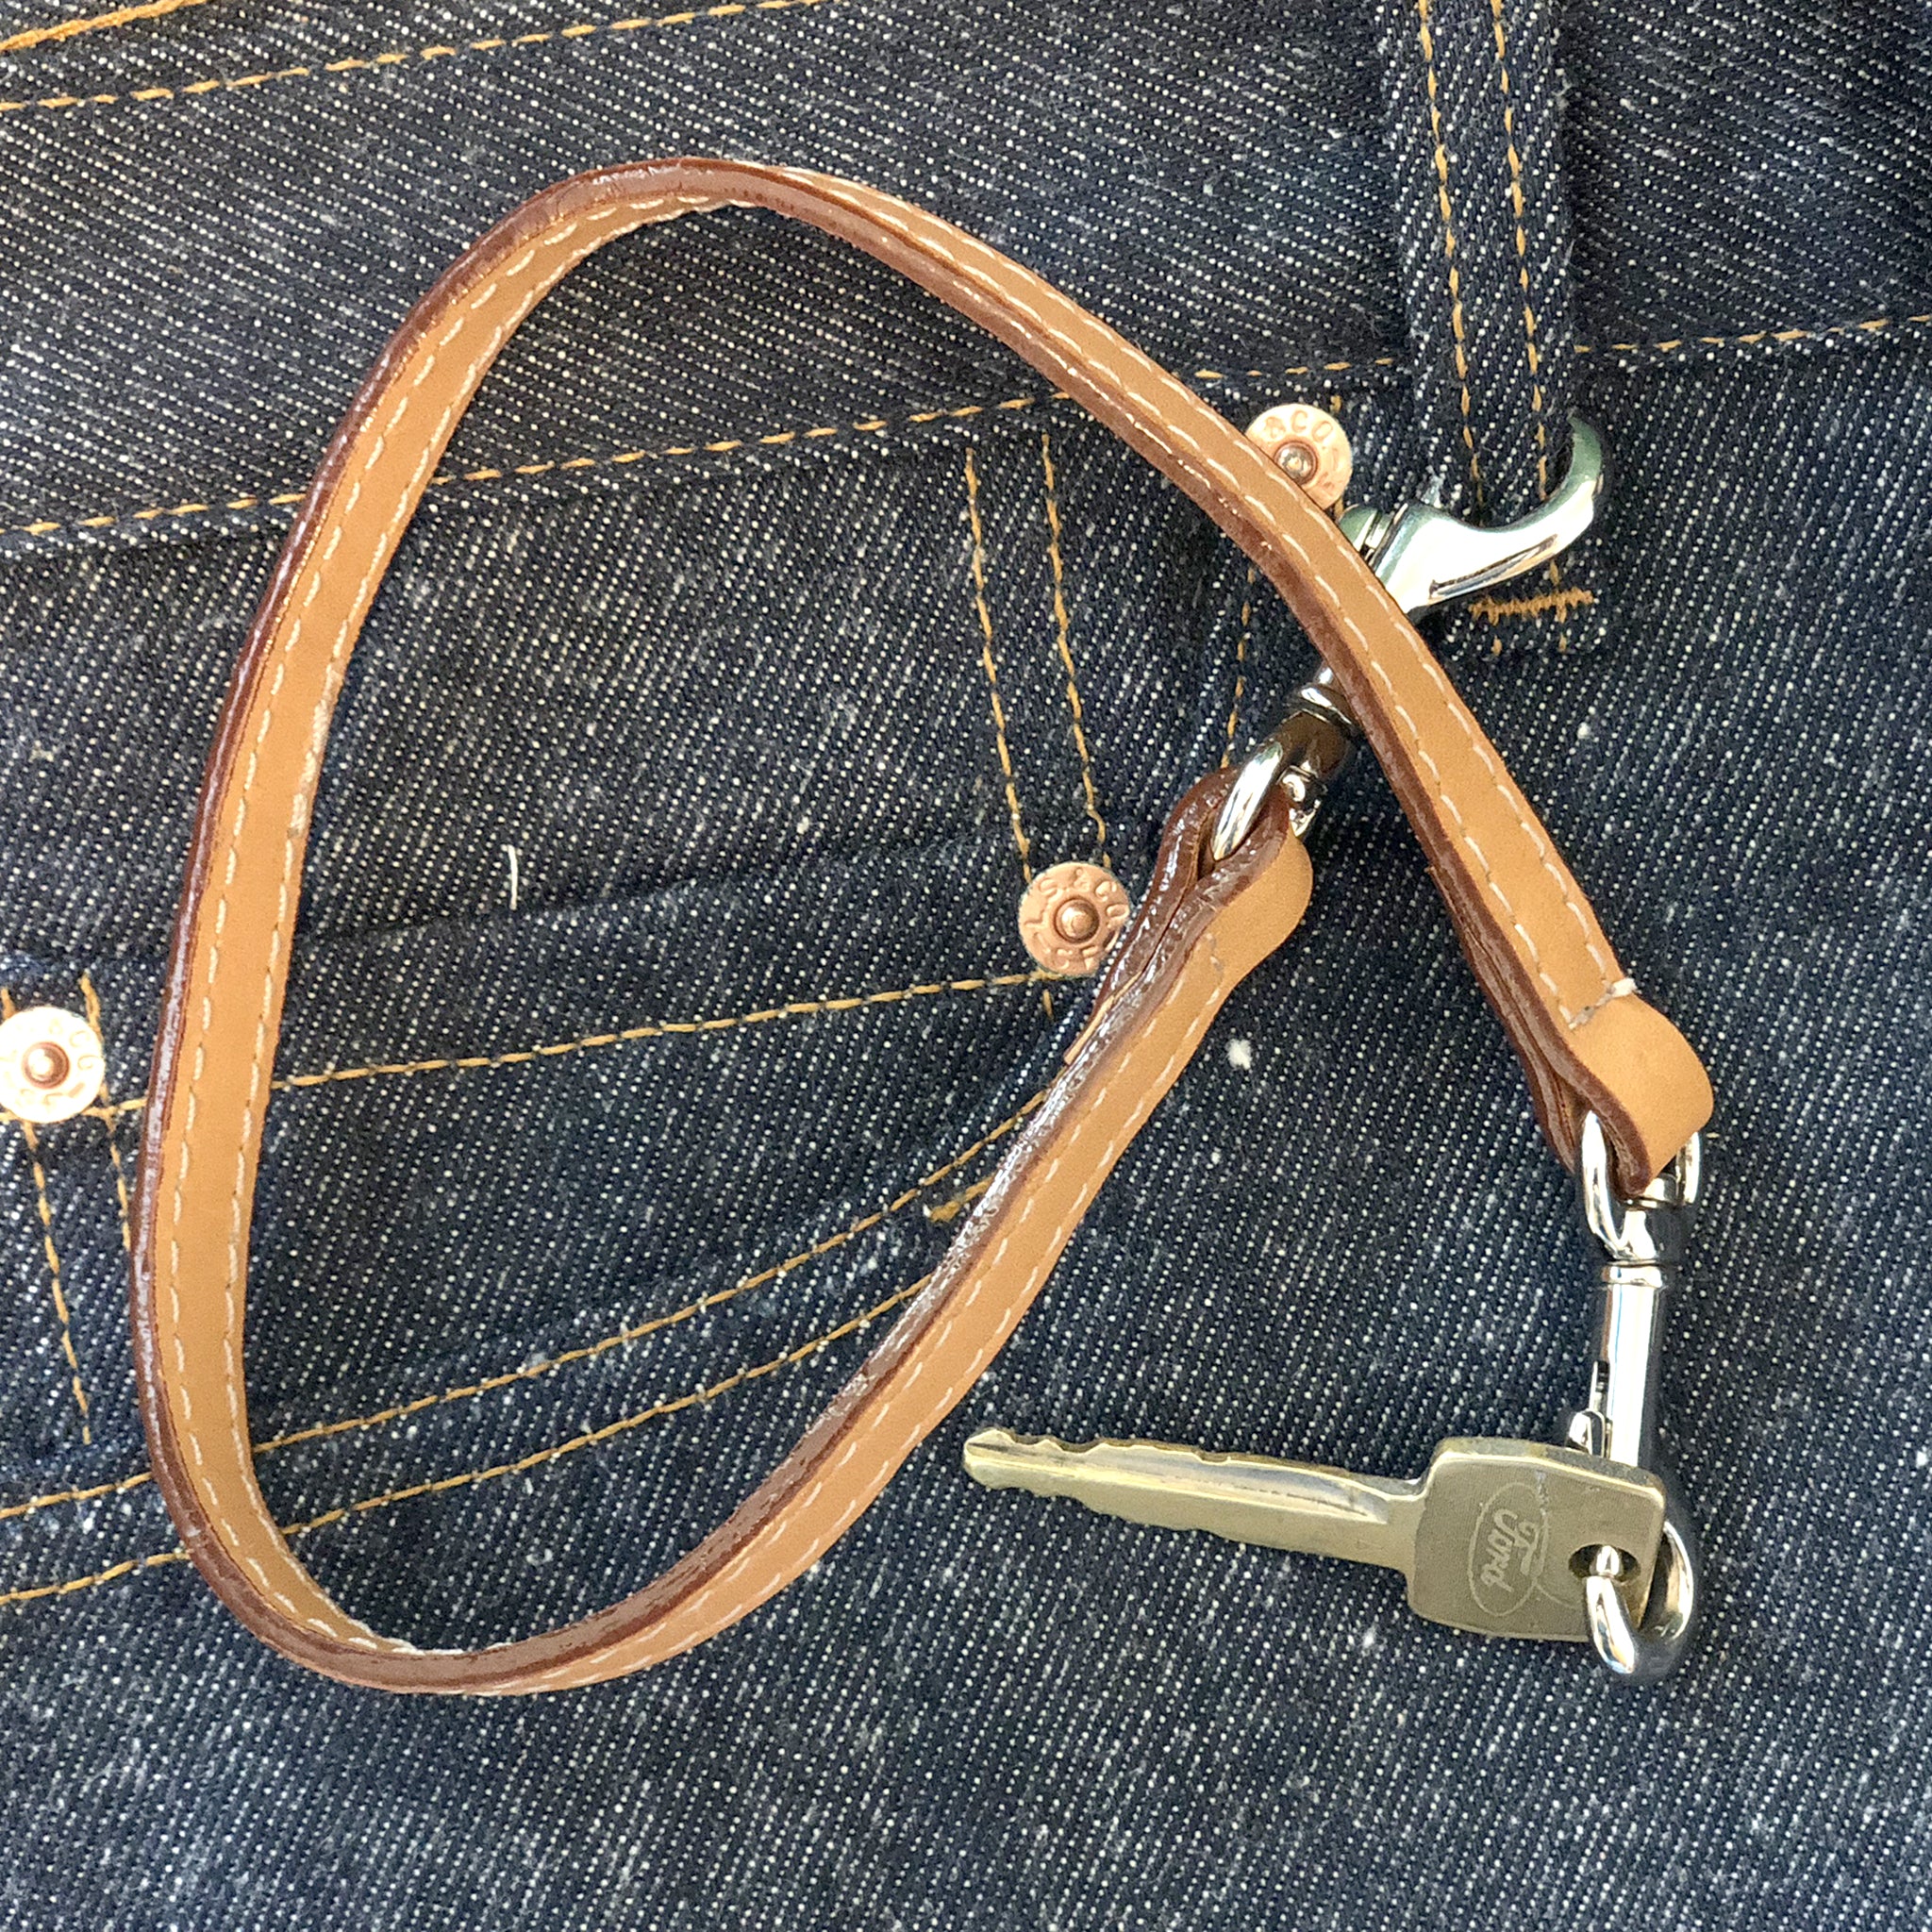 Leather key lanyard in saddle tan attached to Levis belt loop